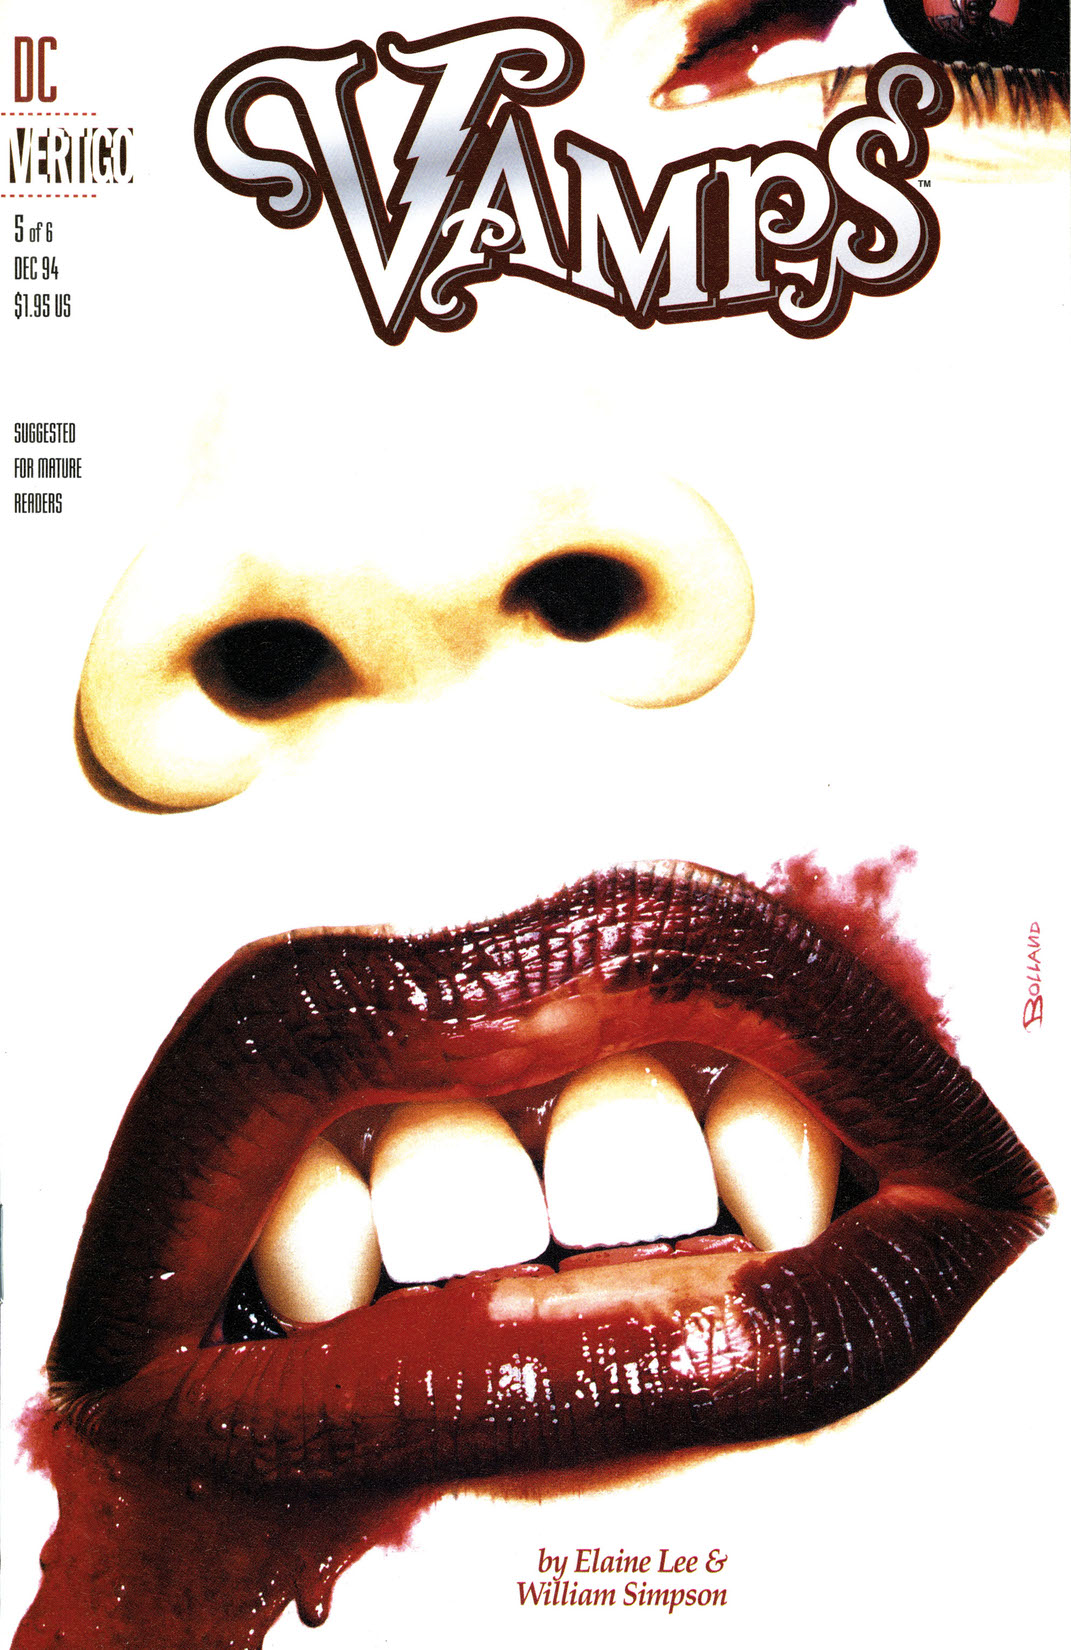 Vamps #5 preview images